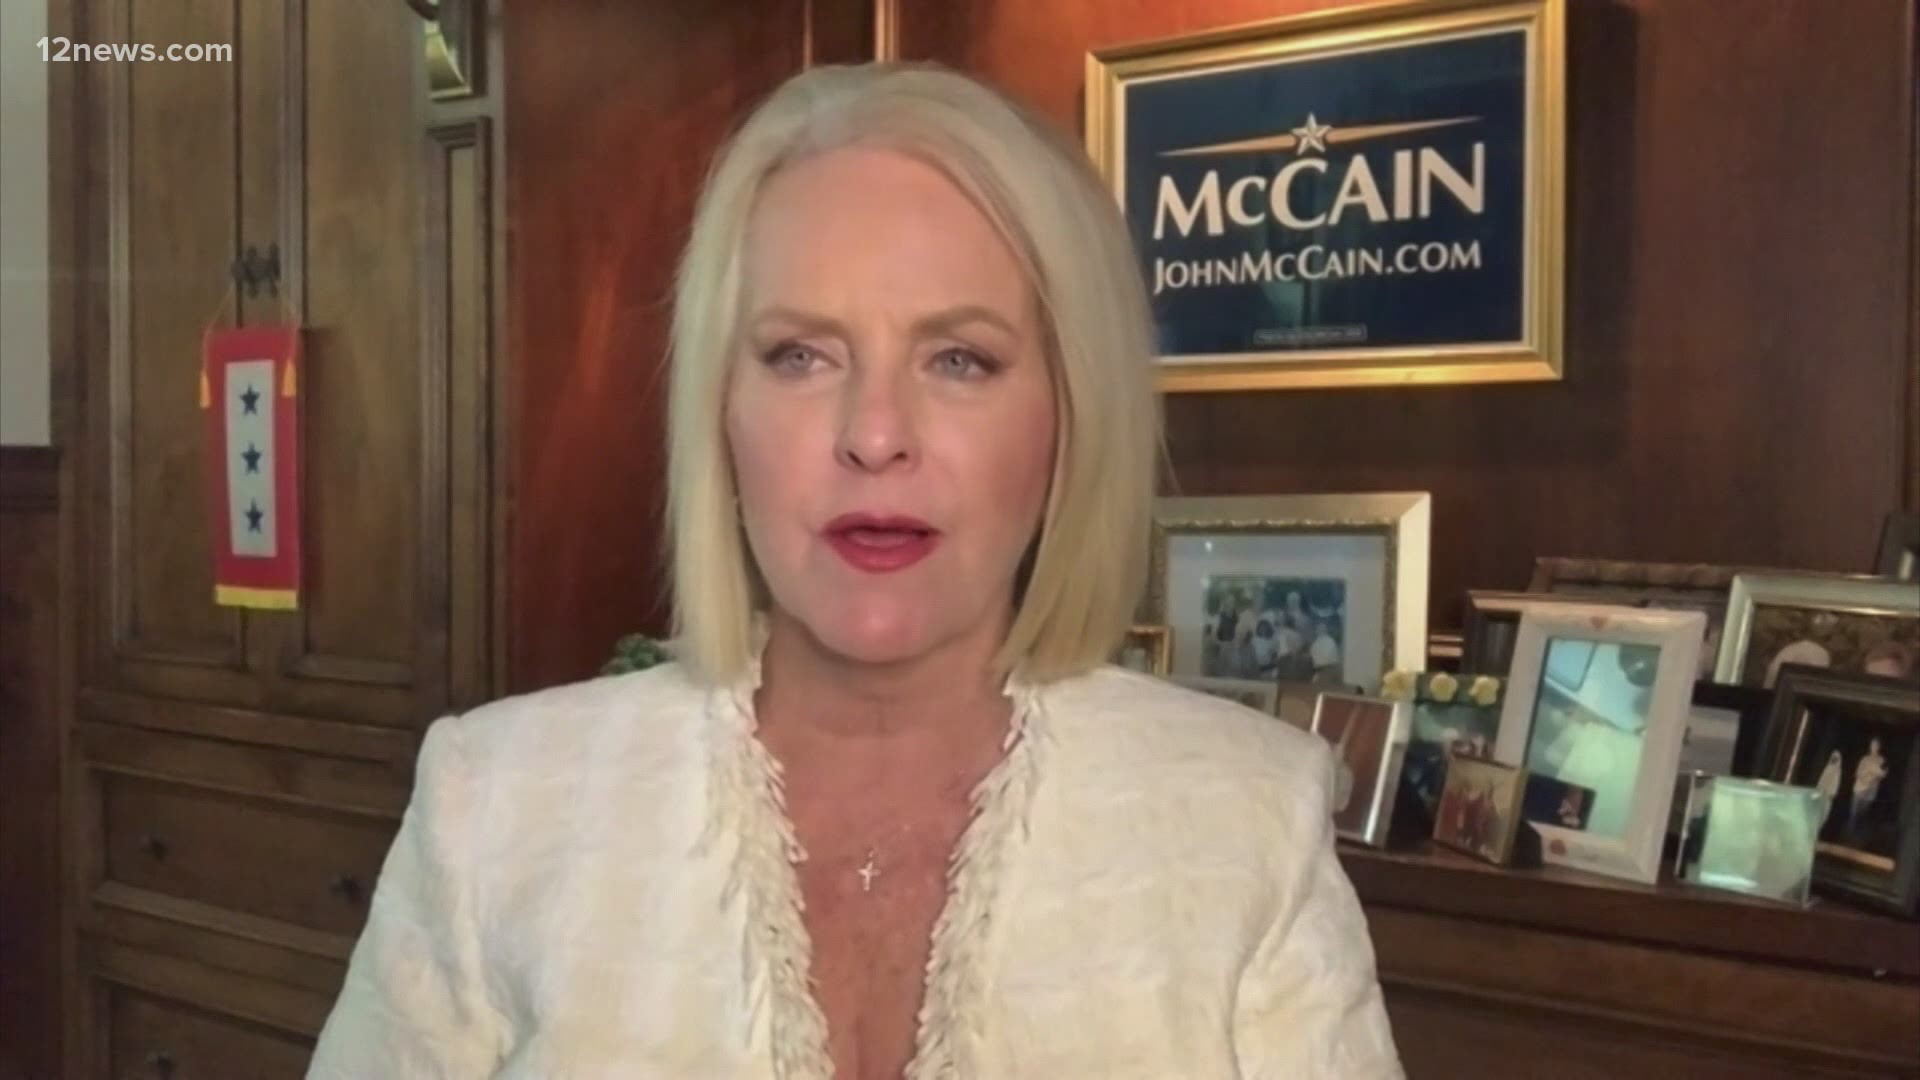 Cindy McCain was back on the campaign trail this year for Democrat Joe Biden. Her late husband's speech still resonates today, a video went viral last week.